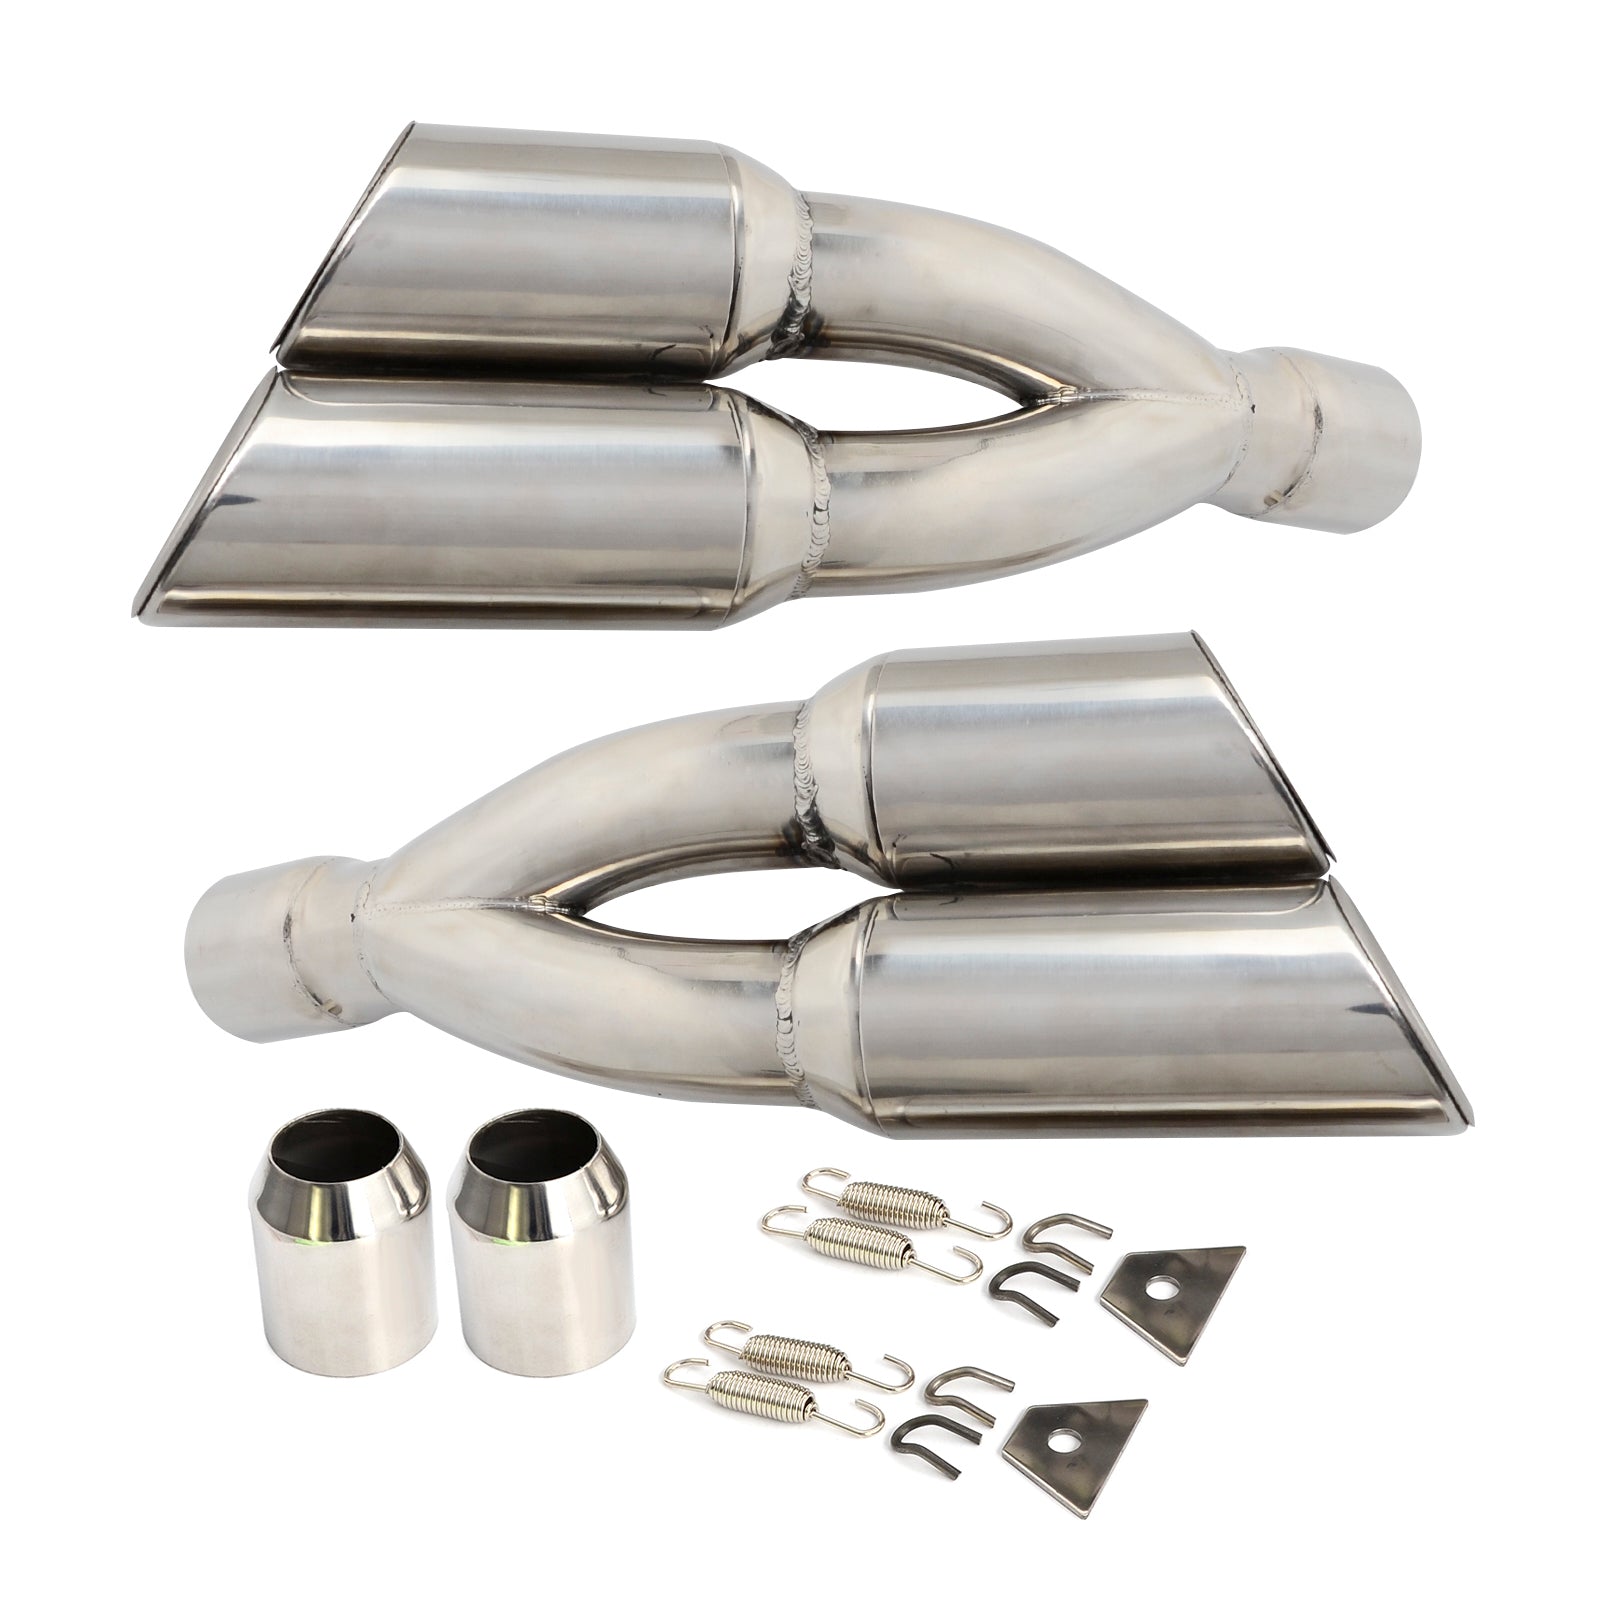 Dual Exhaust Muffler Vent Pipe Slip On 38-51mm Scooters Motorcycle Street Bikes